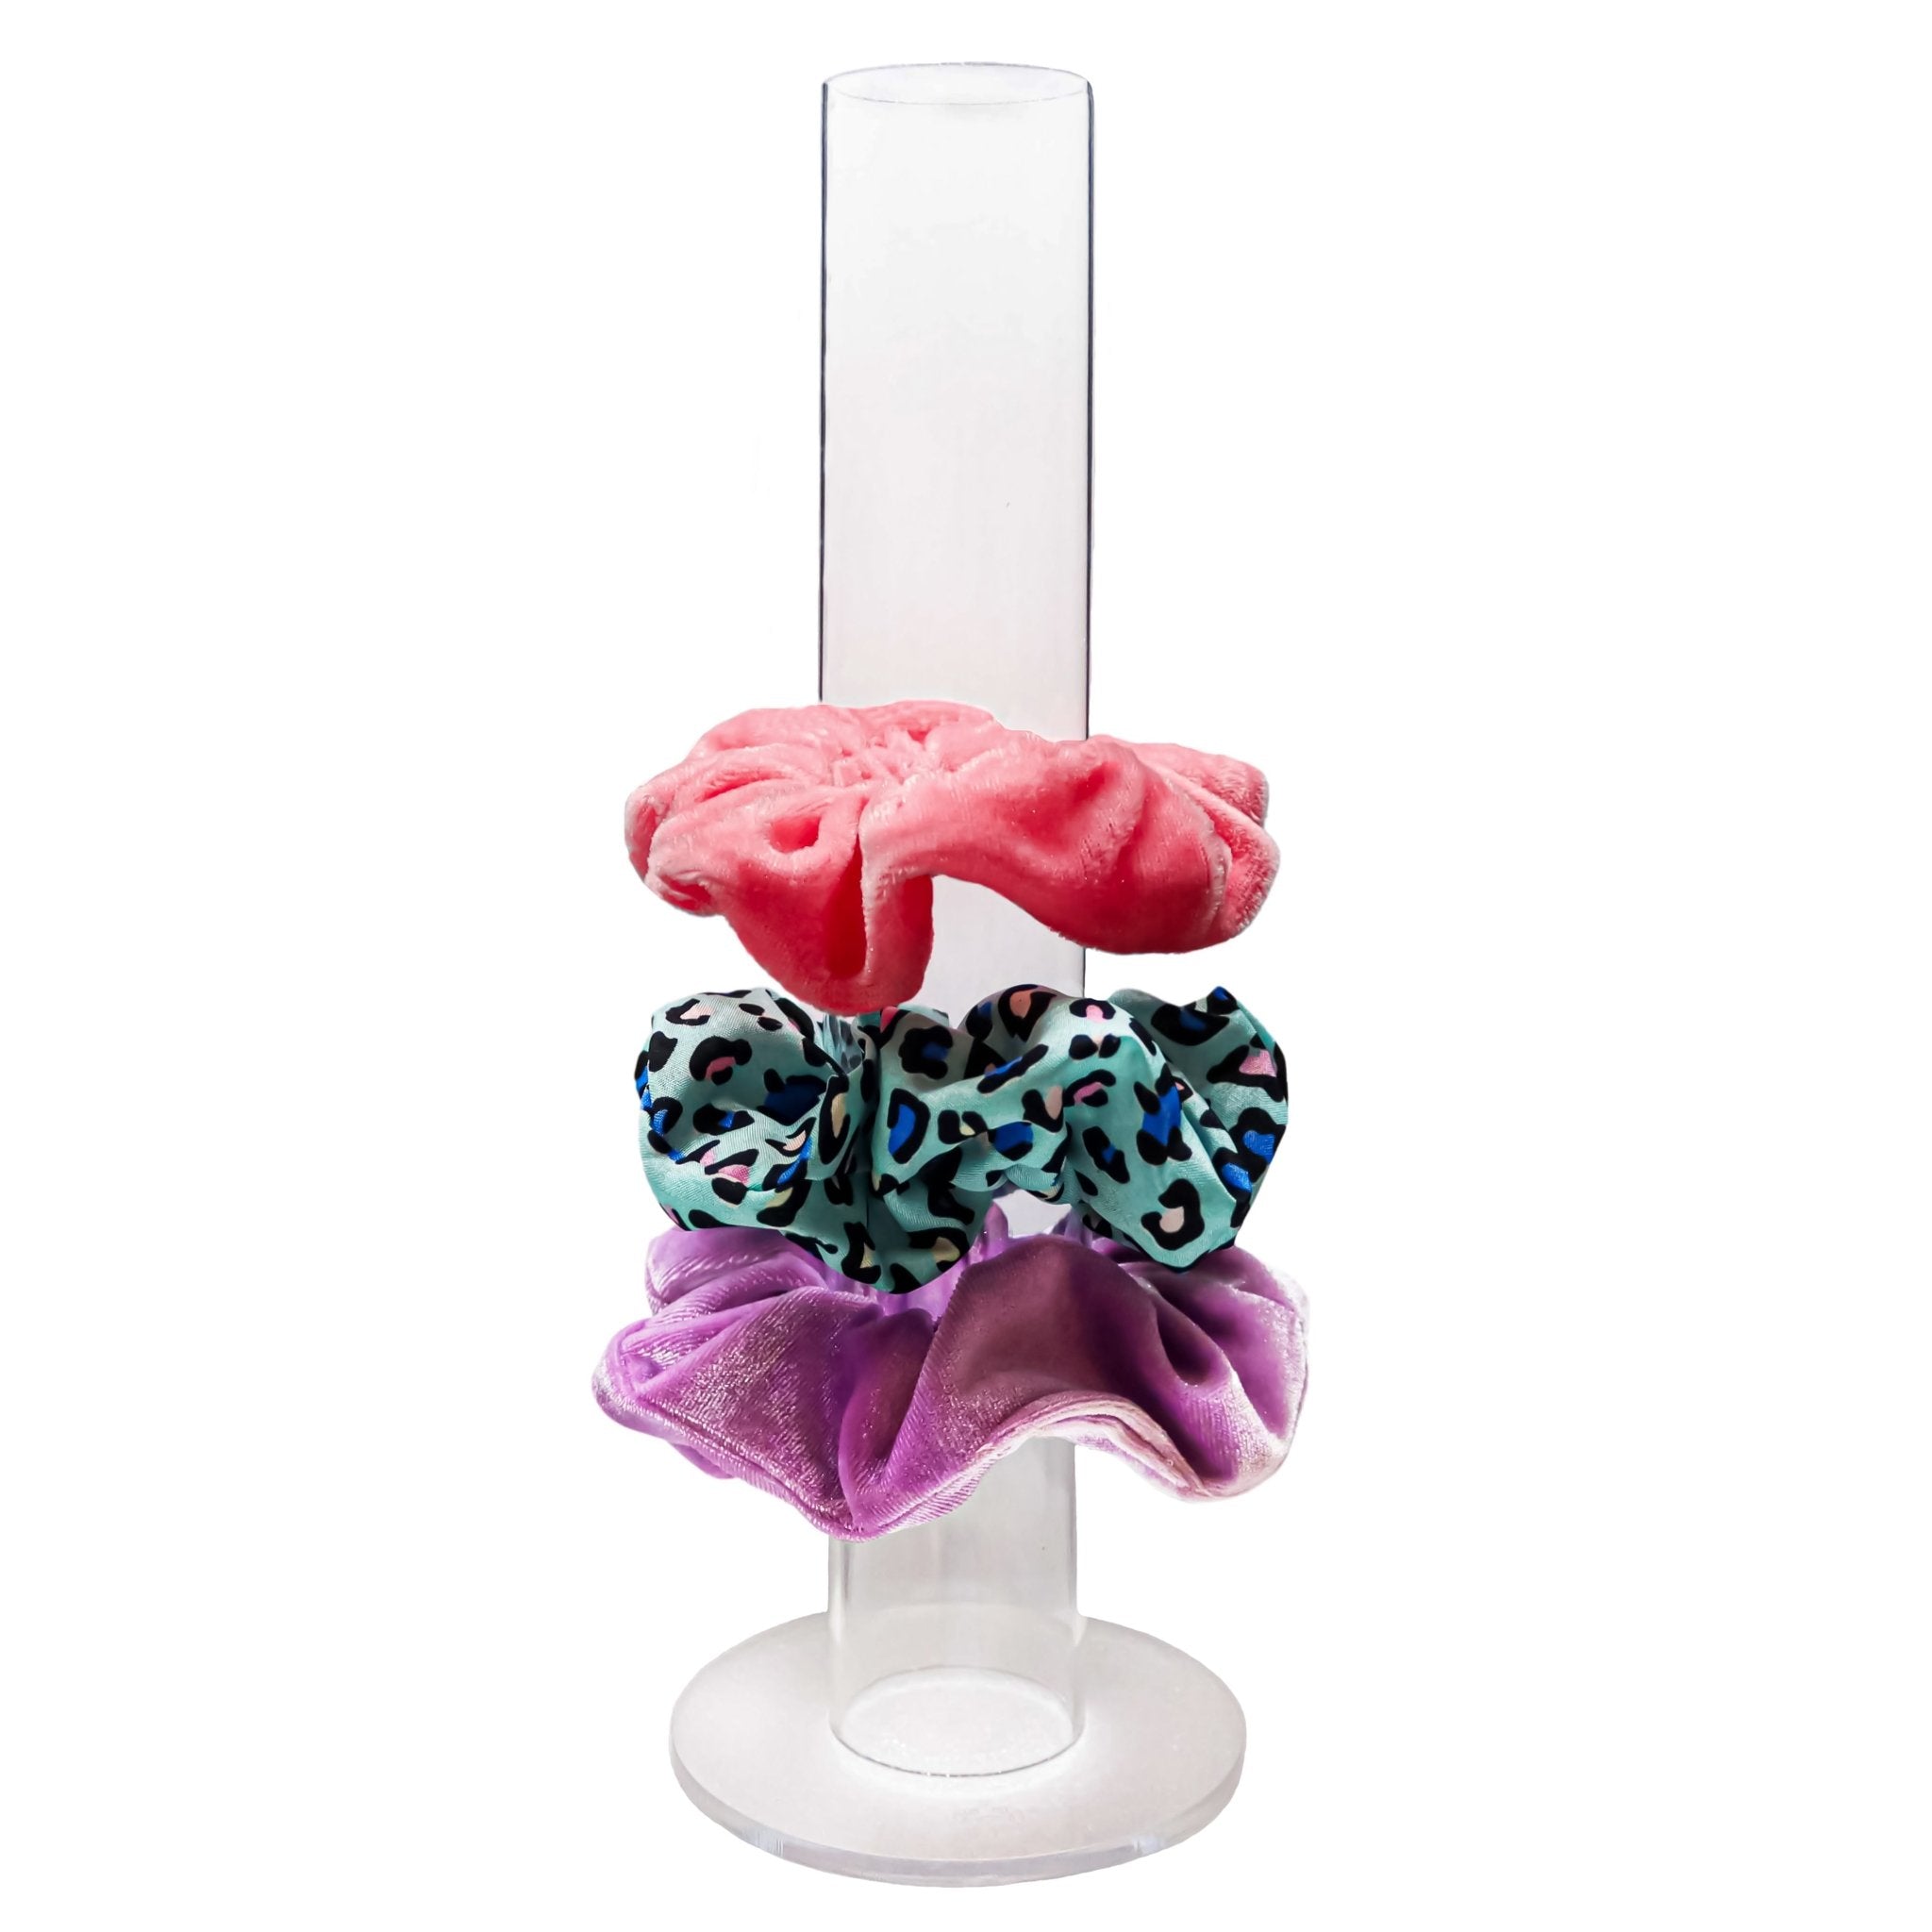 Acrylic Scrunchie Holder Display Stand